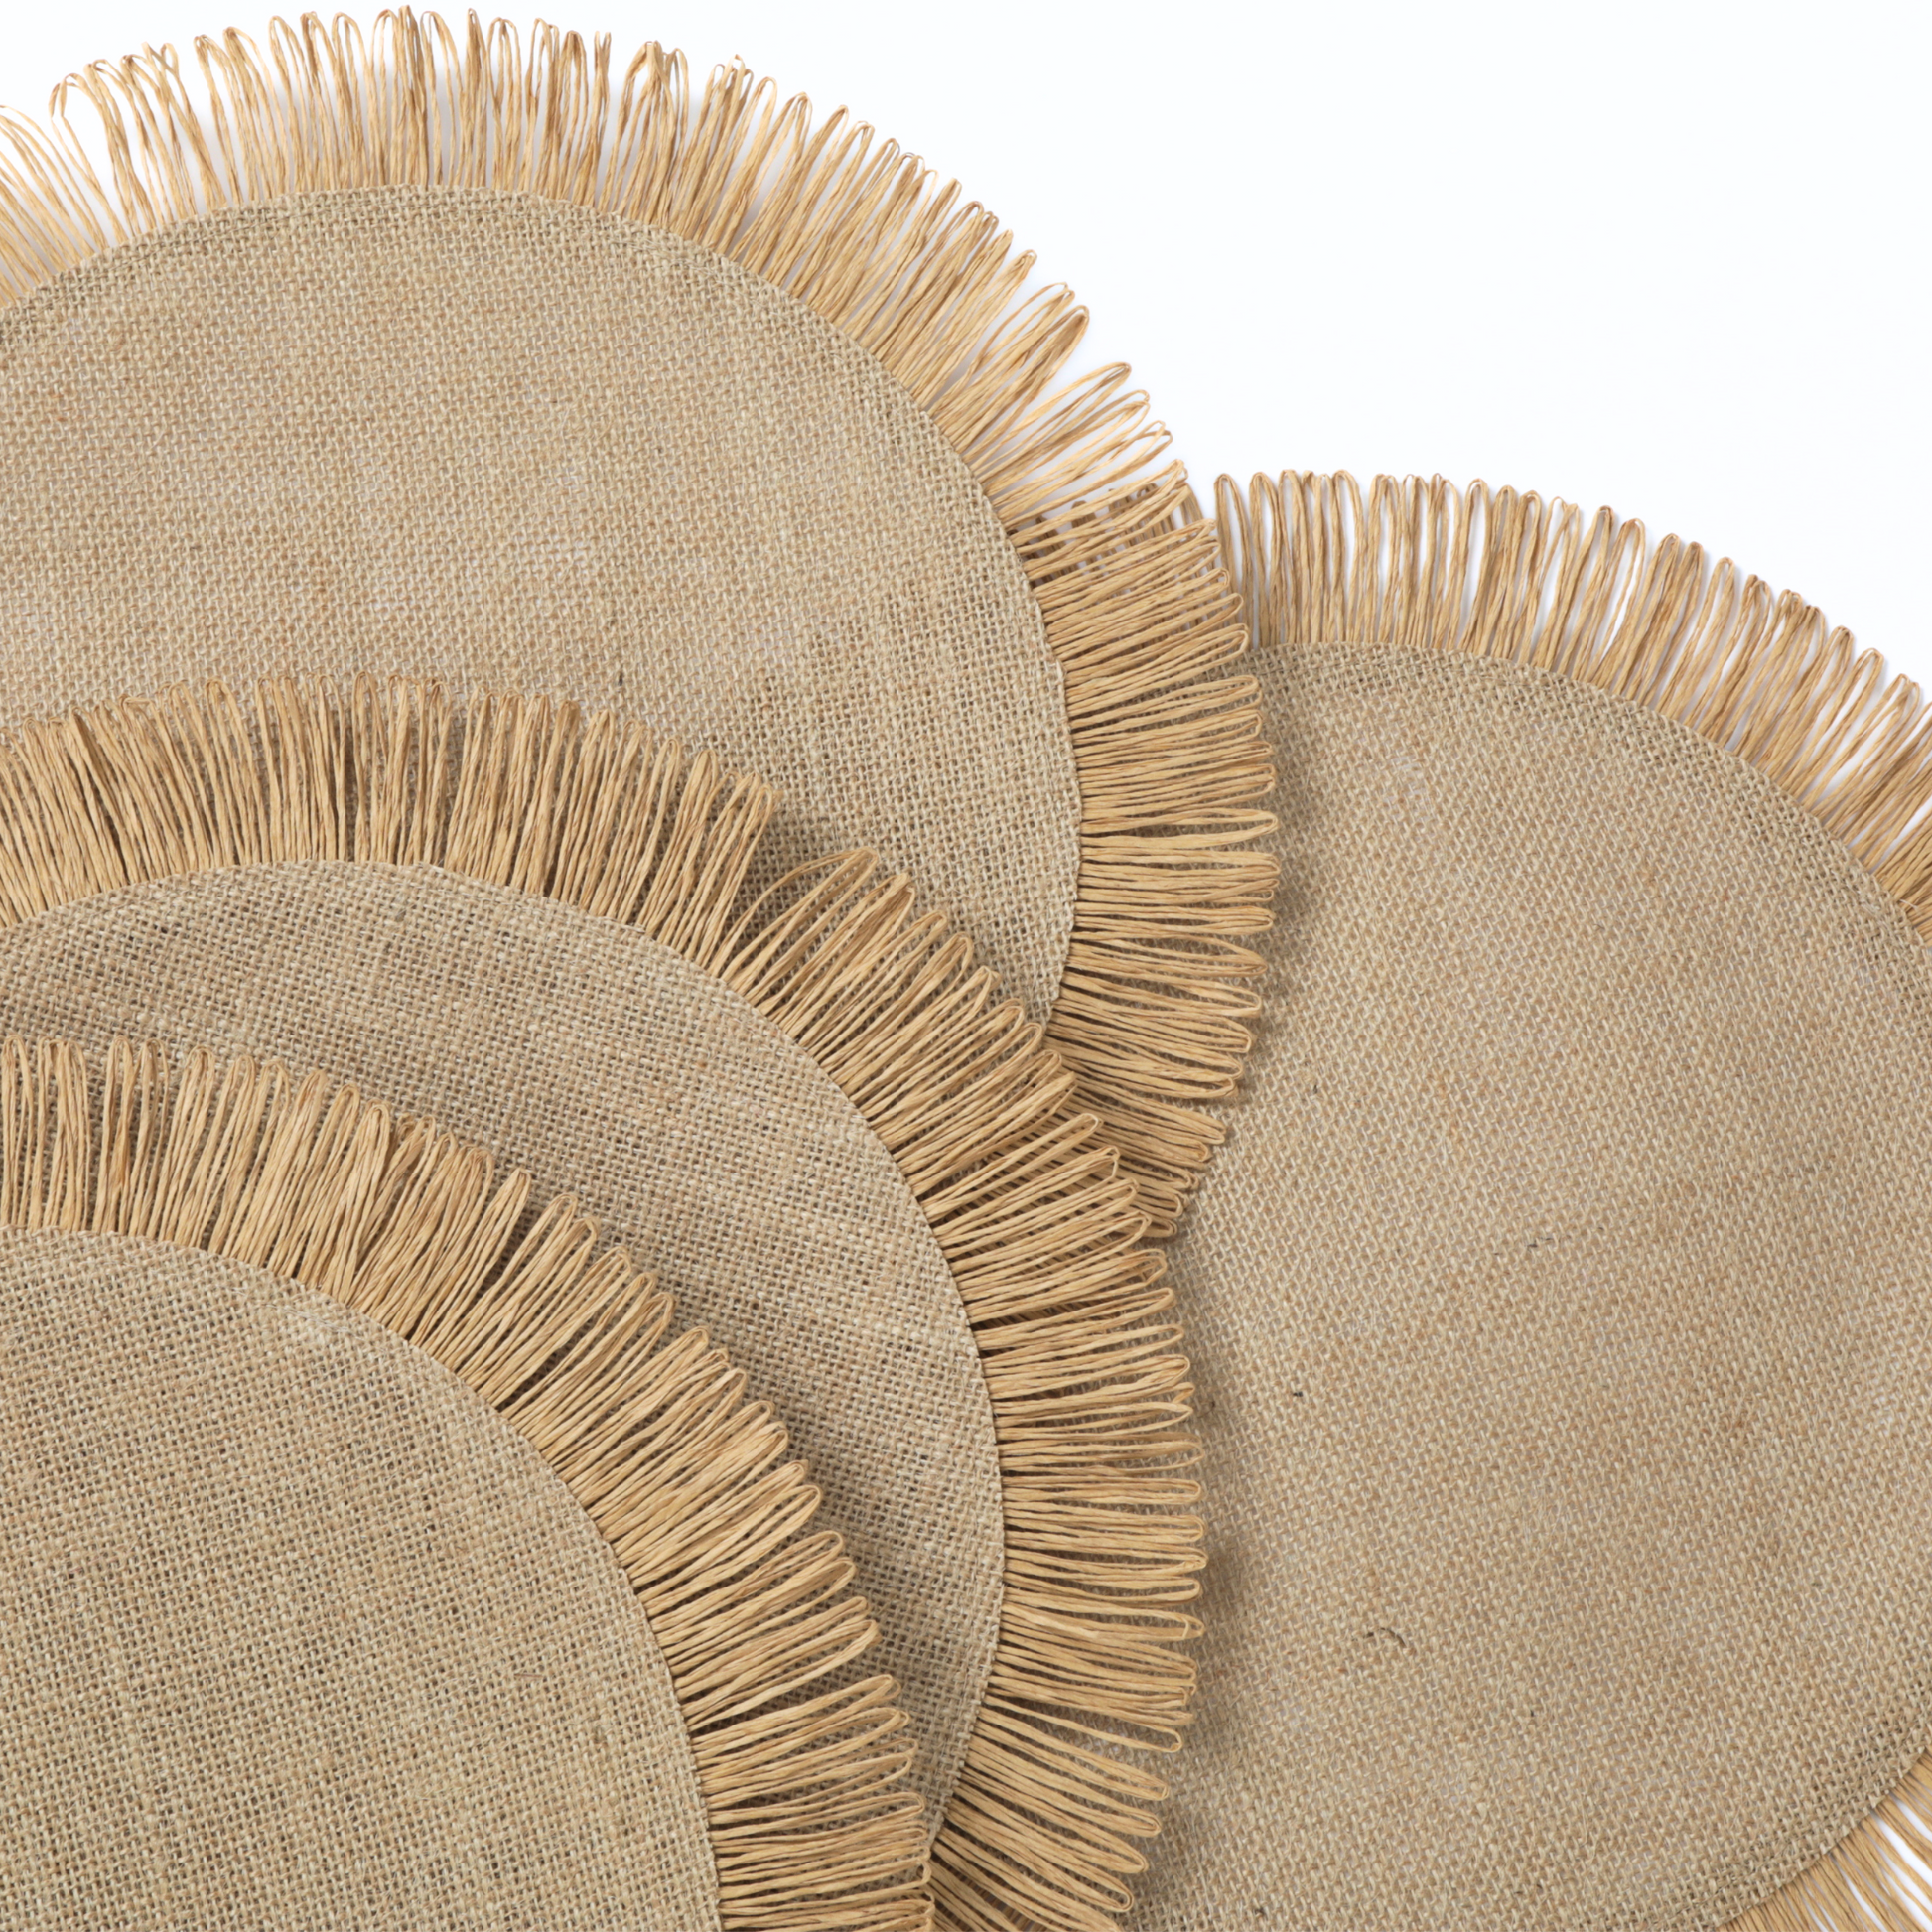 4 pc/set Fringed Edge Woven 15" Placemats